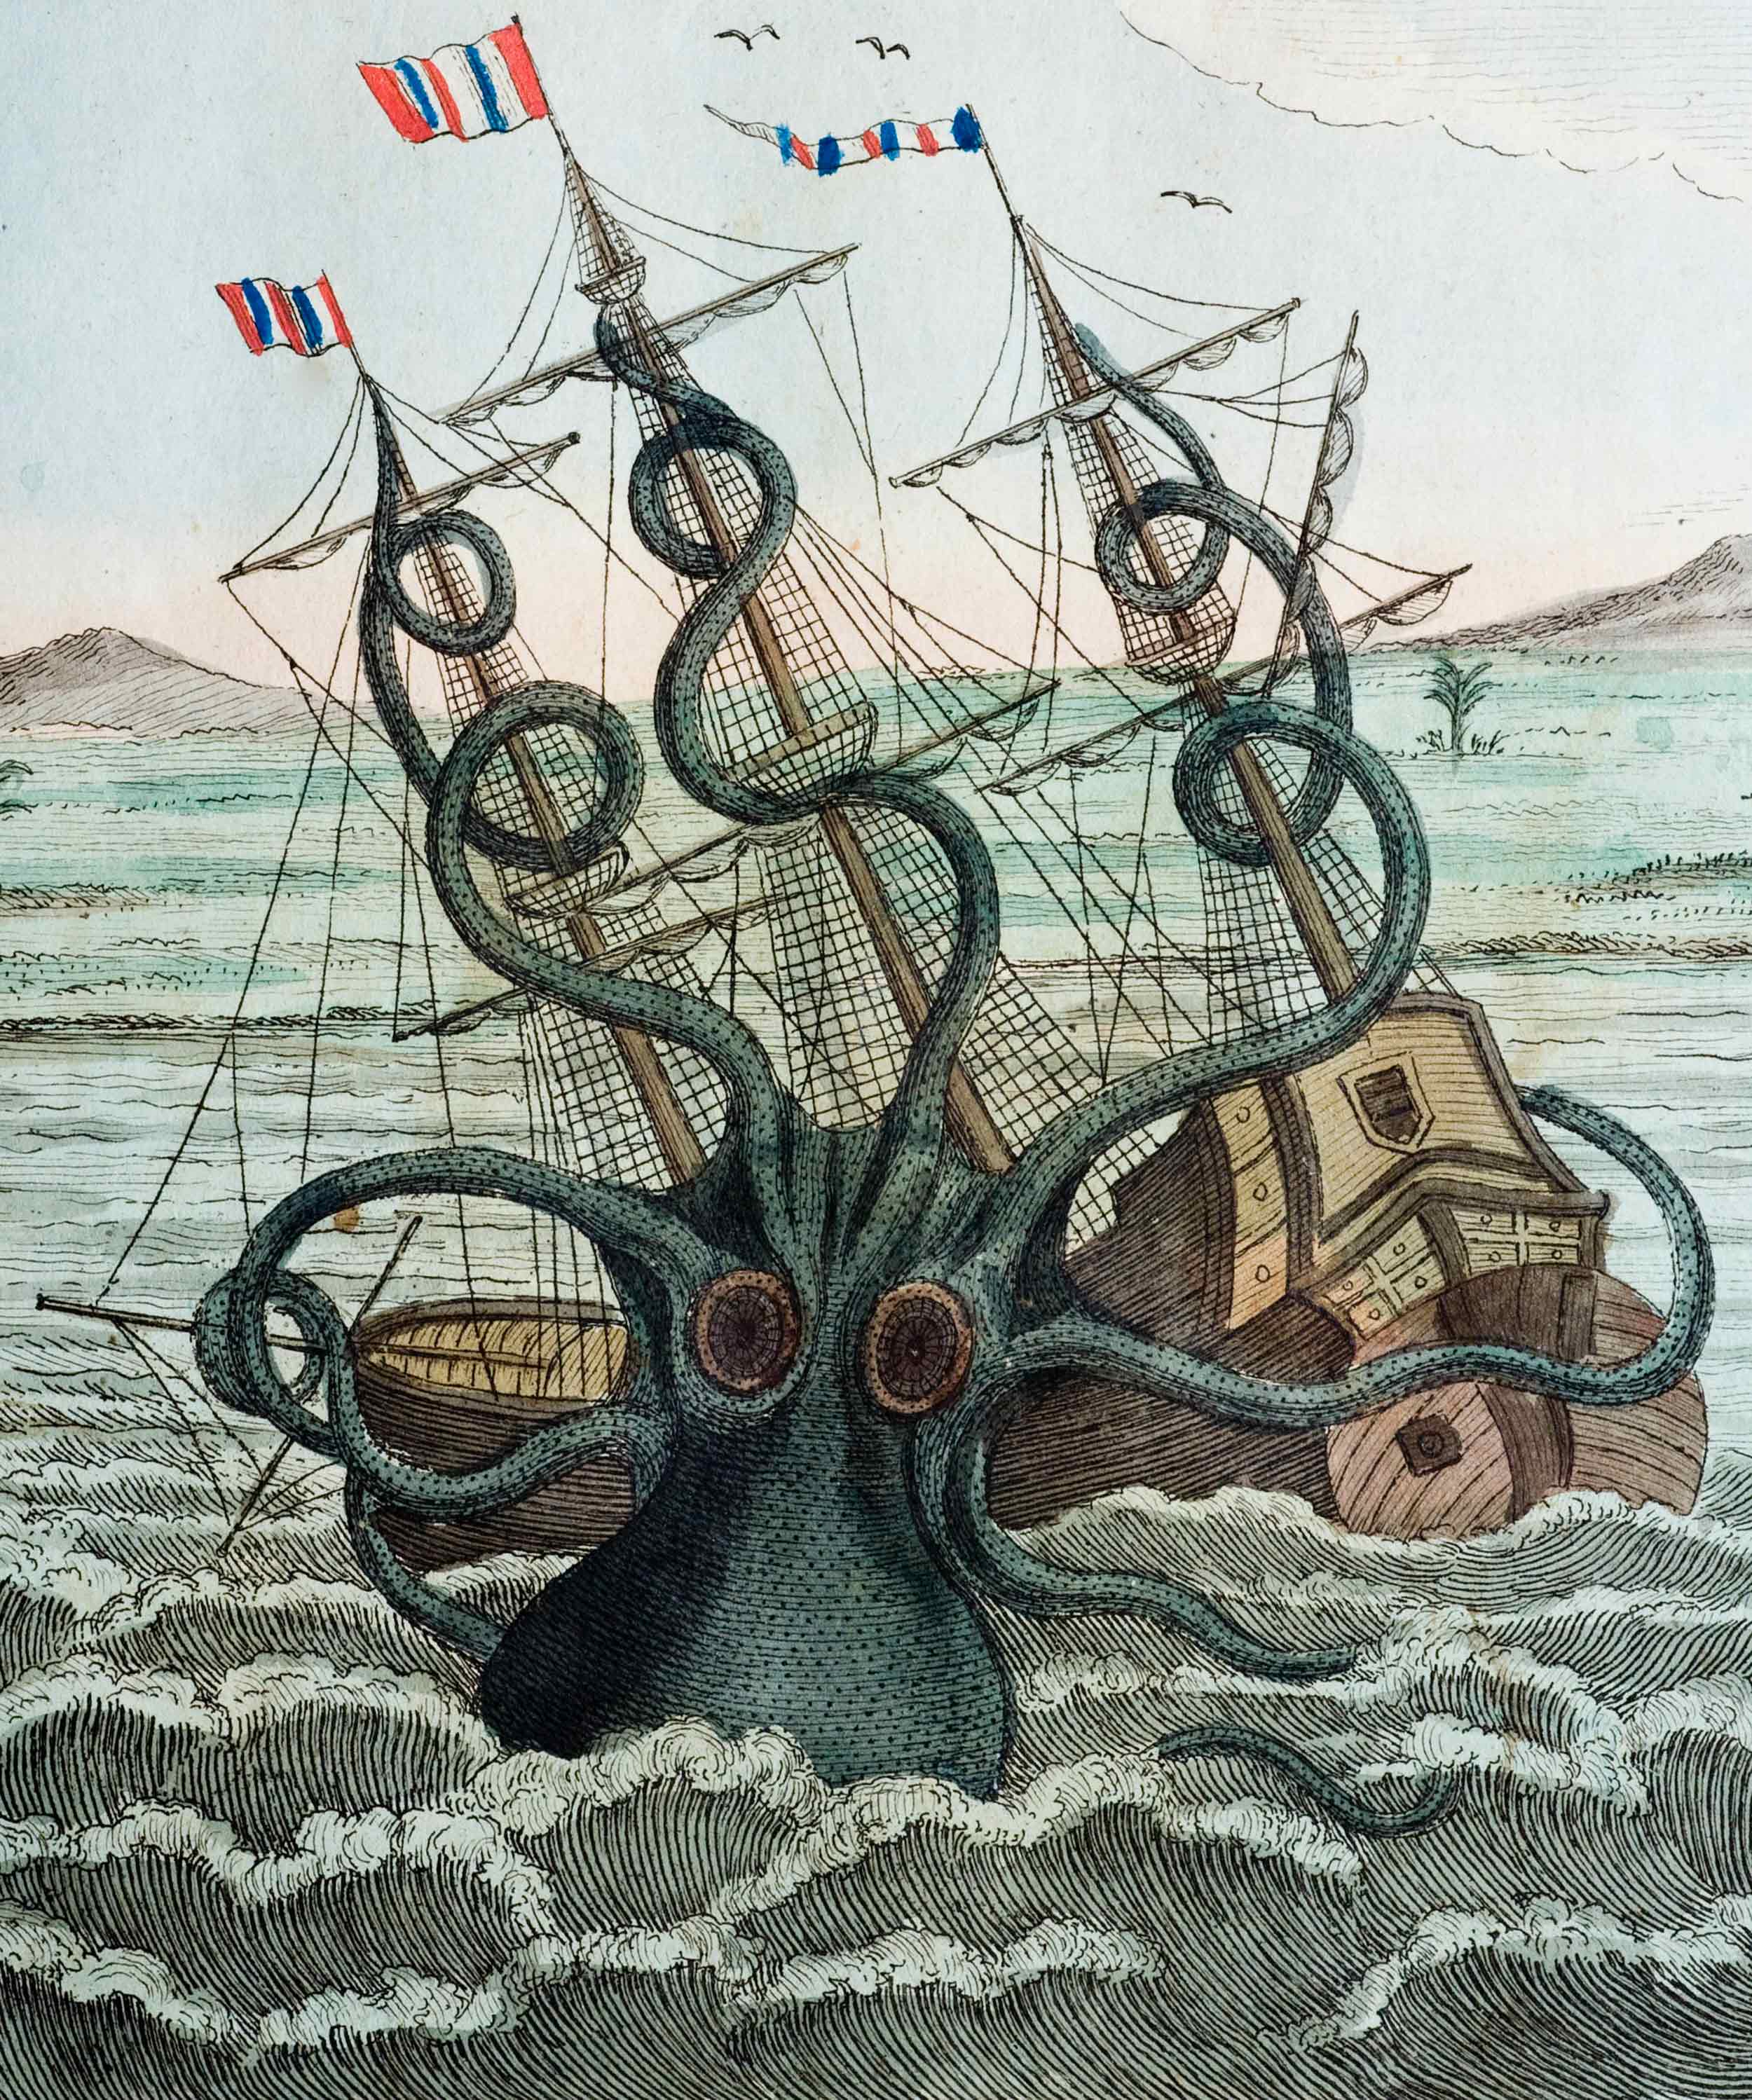 A drawing of a colossal octopus attacking a ship.